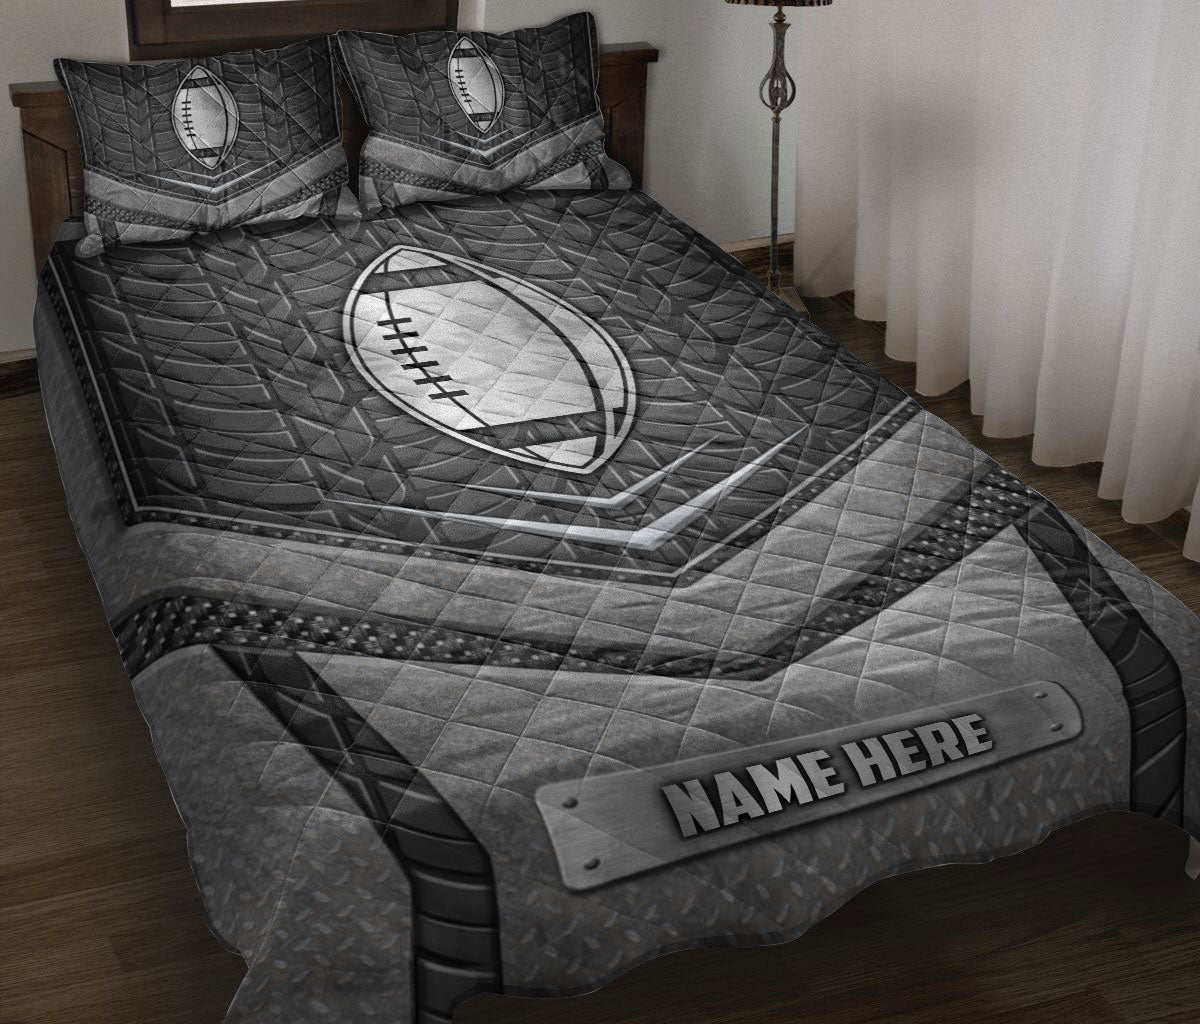 Ohaprints-Quilt-Bed-Set-Pillowcase-Football-Silver-Metal-Unique-Gifts-Custom-Personalized-Name-Blanket-Bedspread-Bedding-2901-Throw (55'' x 60'')